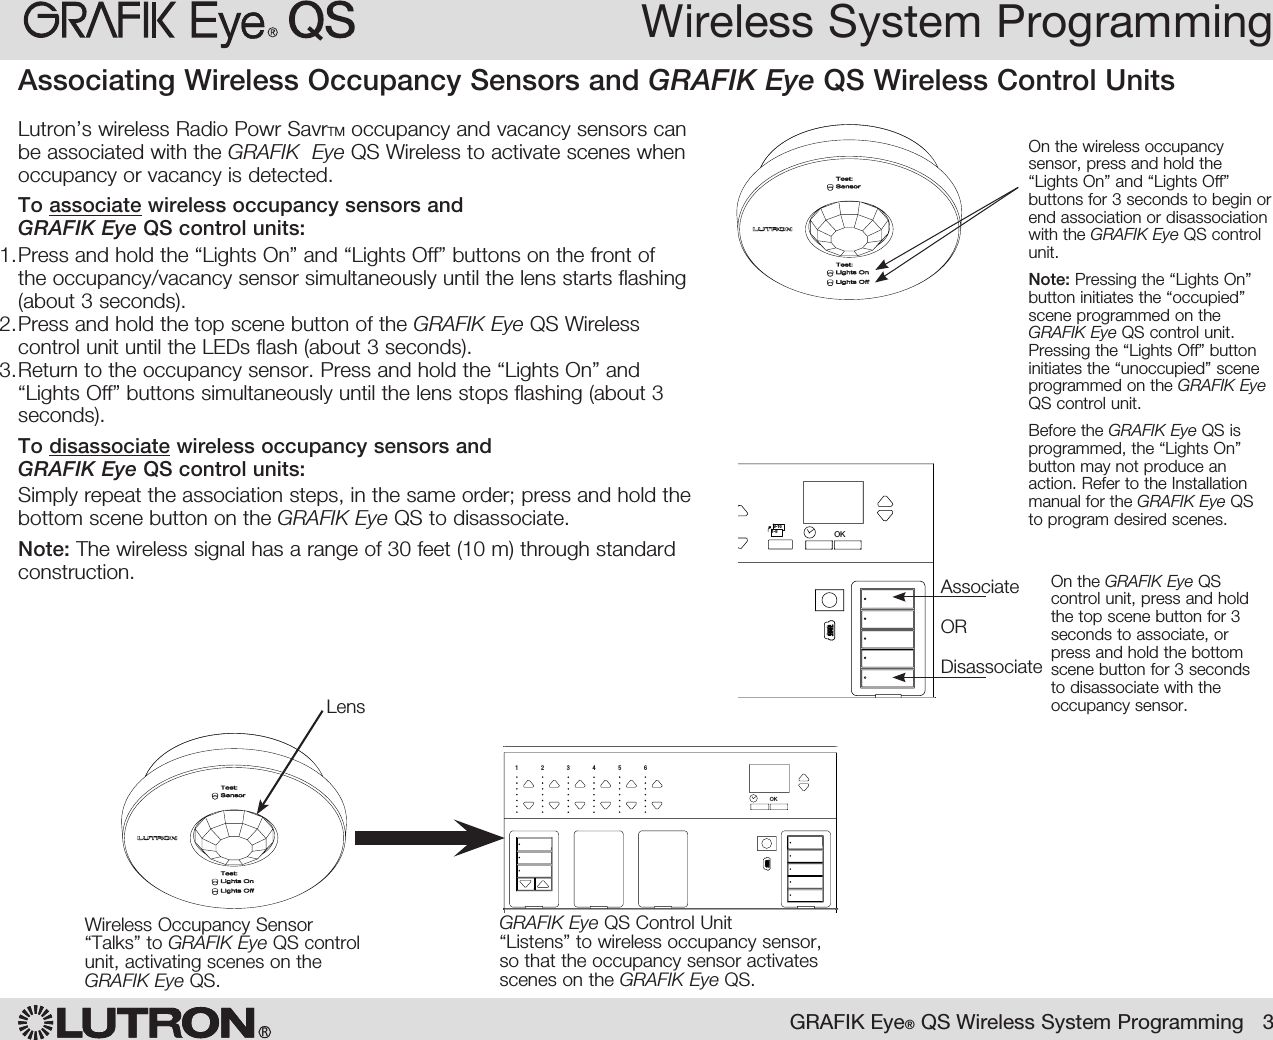 Wireless System ProgrammingRGRAFIK Eye® QS Wireless System Programming   3OK1 2 3 4 5 6Wireless Occupancy Sensor“Talks” to GRAFIK Eye QS control unit, activating scenes on the GRAFIK Eye QS.Lutron’s wireless Radio Powr SavrTM occupancy and vacancy sensors can be associated with the GRAFIK  Eye QS Wireless to activate scenes when occupancy or vacancy is detected.To associate wireless occupancy sensors and  GRAFIK Eye QS control units:1. Press and hold the “Lights On” and “Lights Off” buttons on the front of the occupancy/vacancy sensor simultaneously until the lens starts flashing (about 3 seconds).2. Press and hold the top scene button of the GRAFIK Eye QS Wireless control unit until the LEDs flash (about 3 seconds).3. Return to the occupancy sensor. Press and hold the “Lights On” and “Lights Off” buttons simultaneously until the lens stops flashing (about 3 seconds).To disassociate wireless occupancy sensors and  GRAFIK Eye QS control units:Simply repeat the association steps, in the same order; press and hold the bottom scene button on the GRAFIK Eye QS to disassociate.Note: The wireless signal has a range of 30 feet (10 m) through standard construction.Associating Wireless Occupancy Sensors and GRAFIK Eye QS Wireless Control Units On the wireless occupancy sensor, press and hold the “Lights On” and “Lights Off” buttons for 3 seconds to begin or end association or disassociation with the GRAFIK Eye QS control unit.Note: Pressing the “Lights On” button initiates the “occupied” scene programmed on the GRAFIK Eye QS control unit. Pressing the “Lights Off” button initiates the “unoccupied” scene programmed on the GRAFIK Eye QS control unit. Before the GRAFIK Eye QS is programmed, the “Lights On” button may not produce an action. Refer to the Installation manual for the GRAFIK Eye QS to program desired scenes.OK1 2 34569 10 11 12 13 14 7815 169-161-8On the GRAFIK Eye QS control unit, press and hold the top scene button for 3 seconds to associate, or press and hold the bottom scene button for 3 seconds to disassociate with the occupancy sensor.AssociateORDisassociateGRAFIK Eye QS Control Unit“Listens” to wireless occupancy sensor, so that the occupancy sensor activates scenes on the GRAFIK Eye QS.Lens